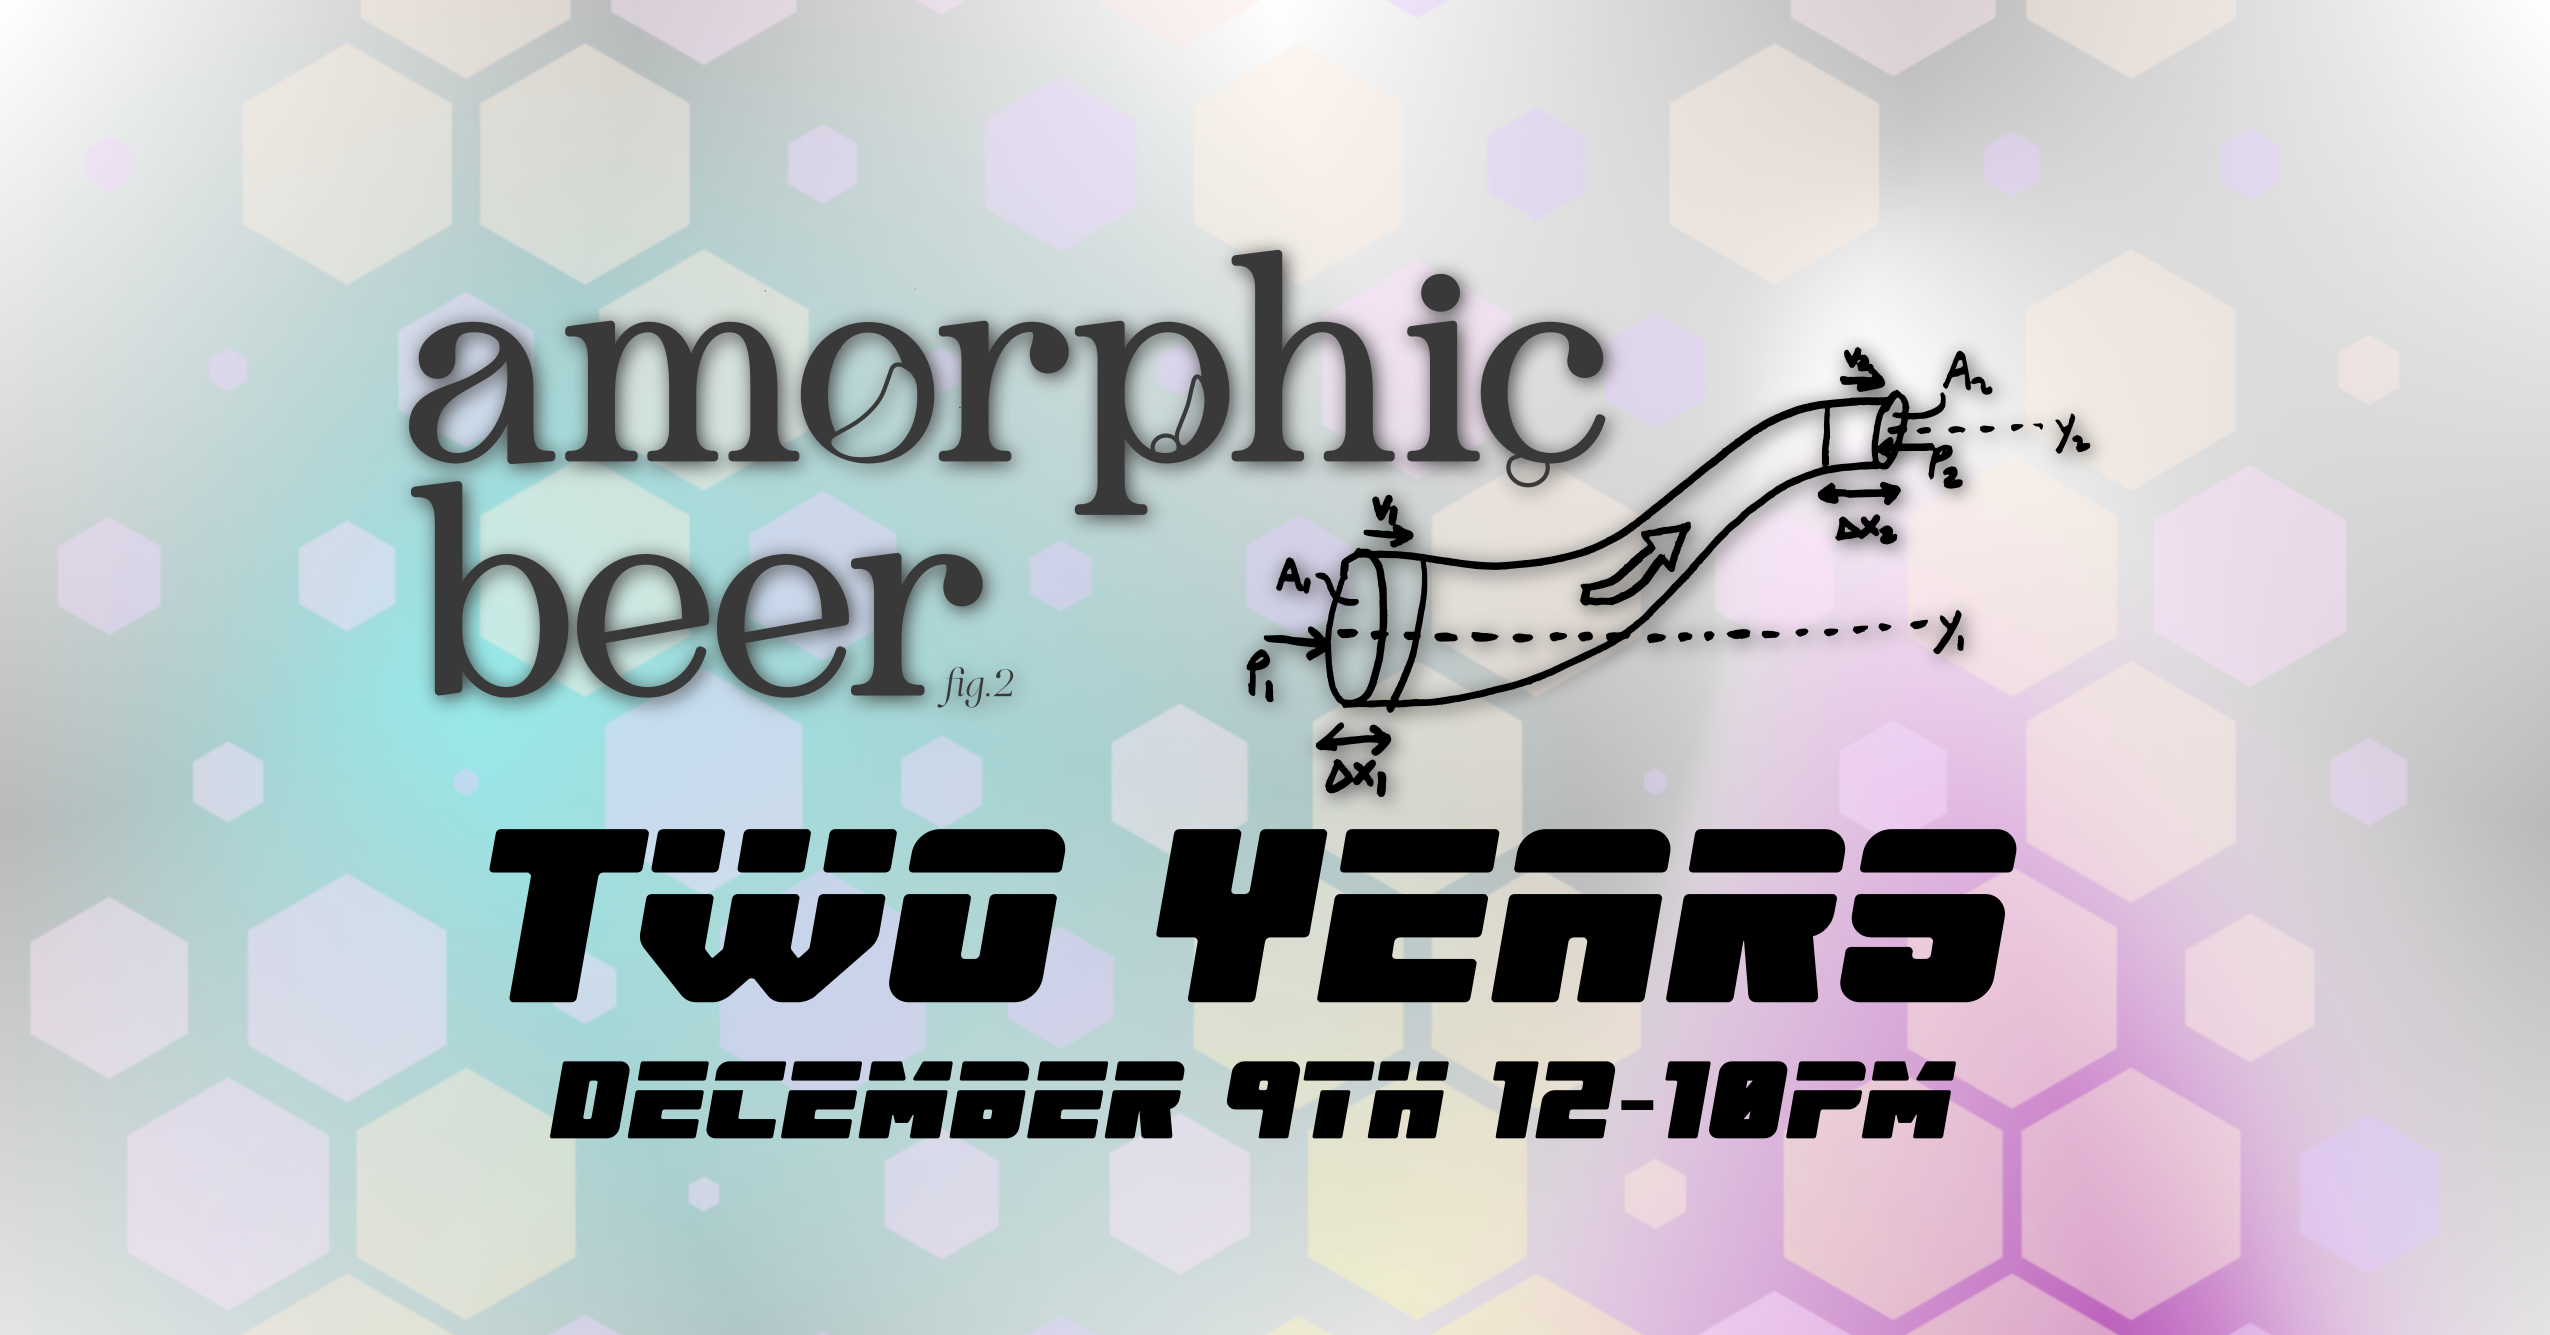 Amorphic Beer 2nd Birthday Party, December 9th!